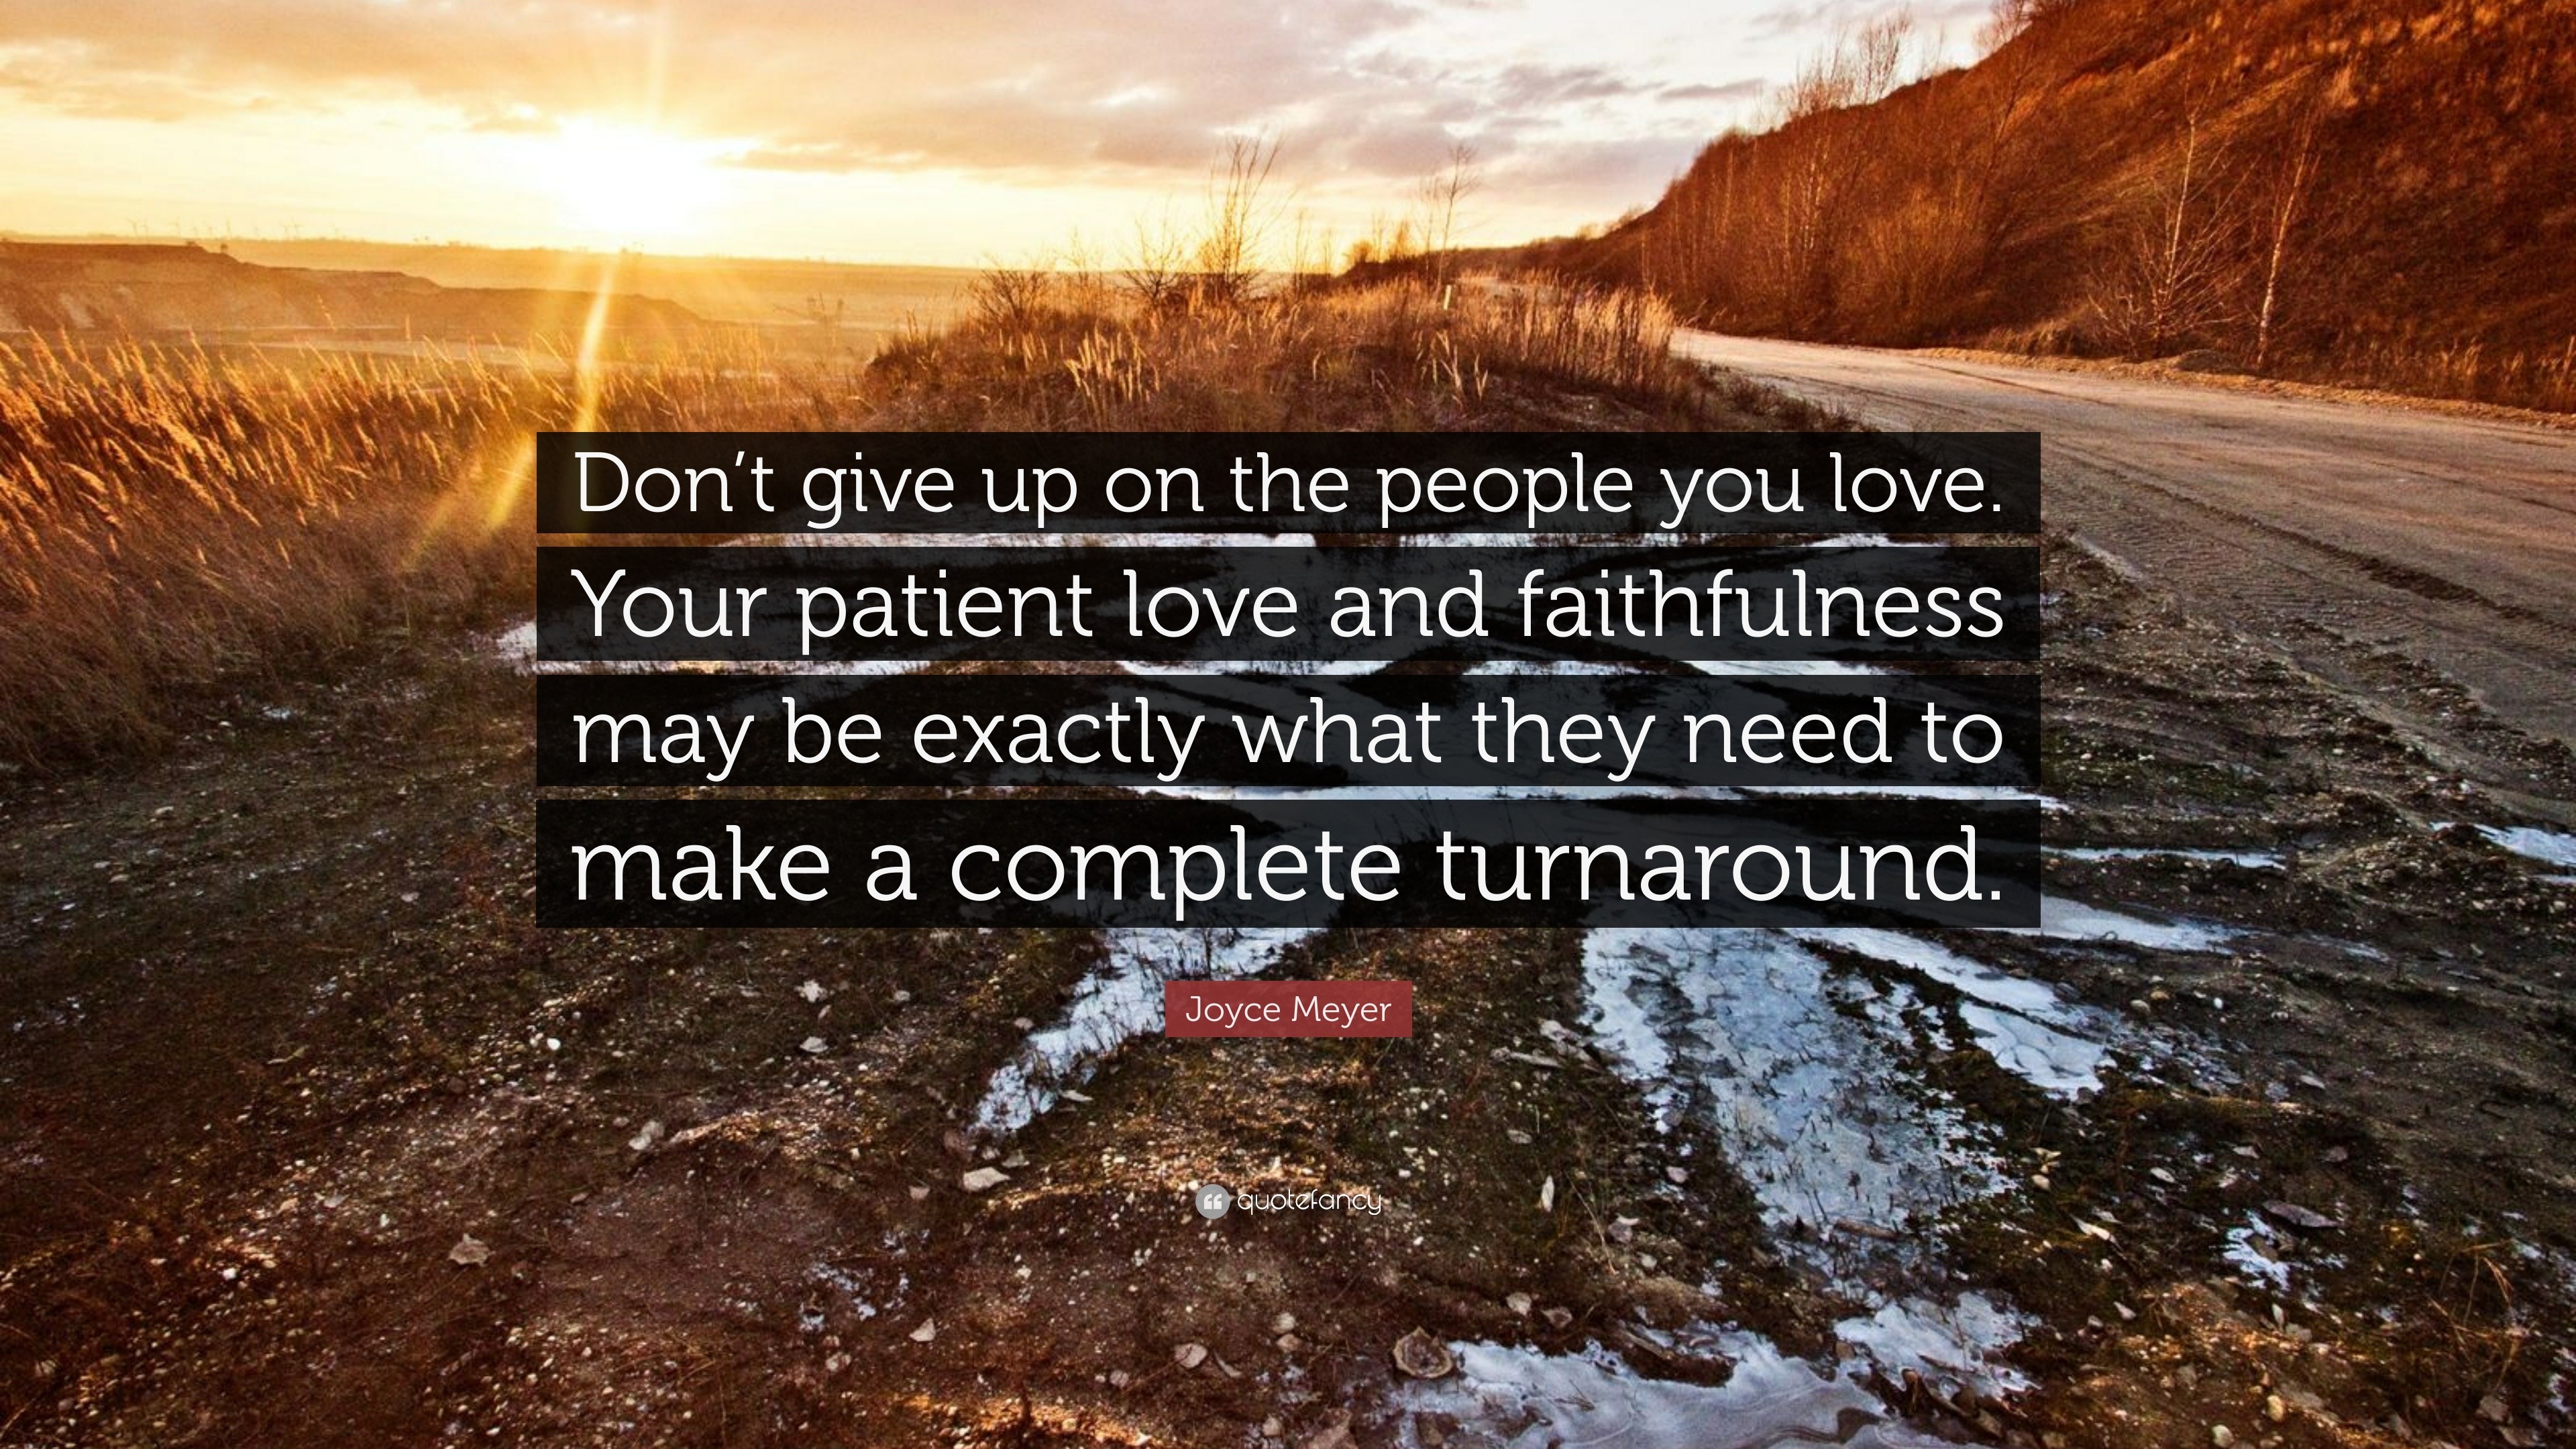 Joyce Meyer Quote “Don t give up on the people you love